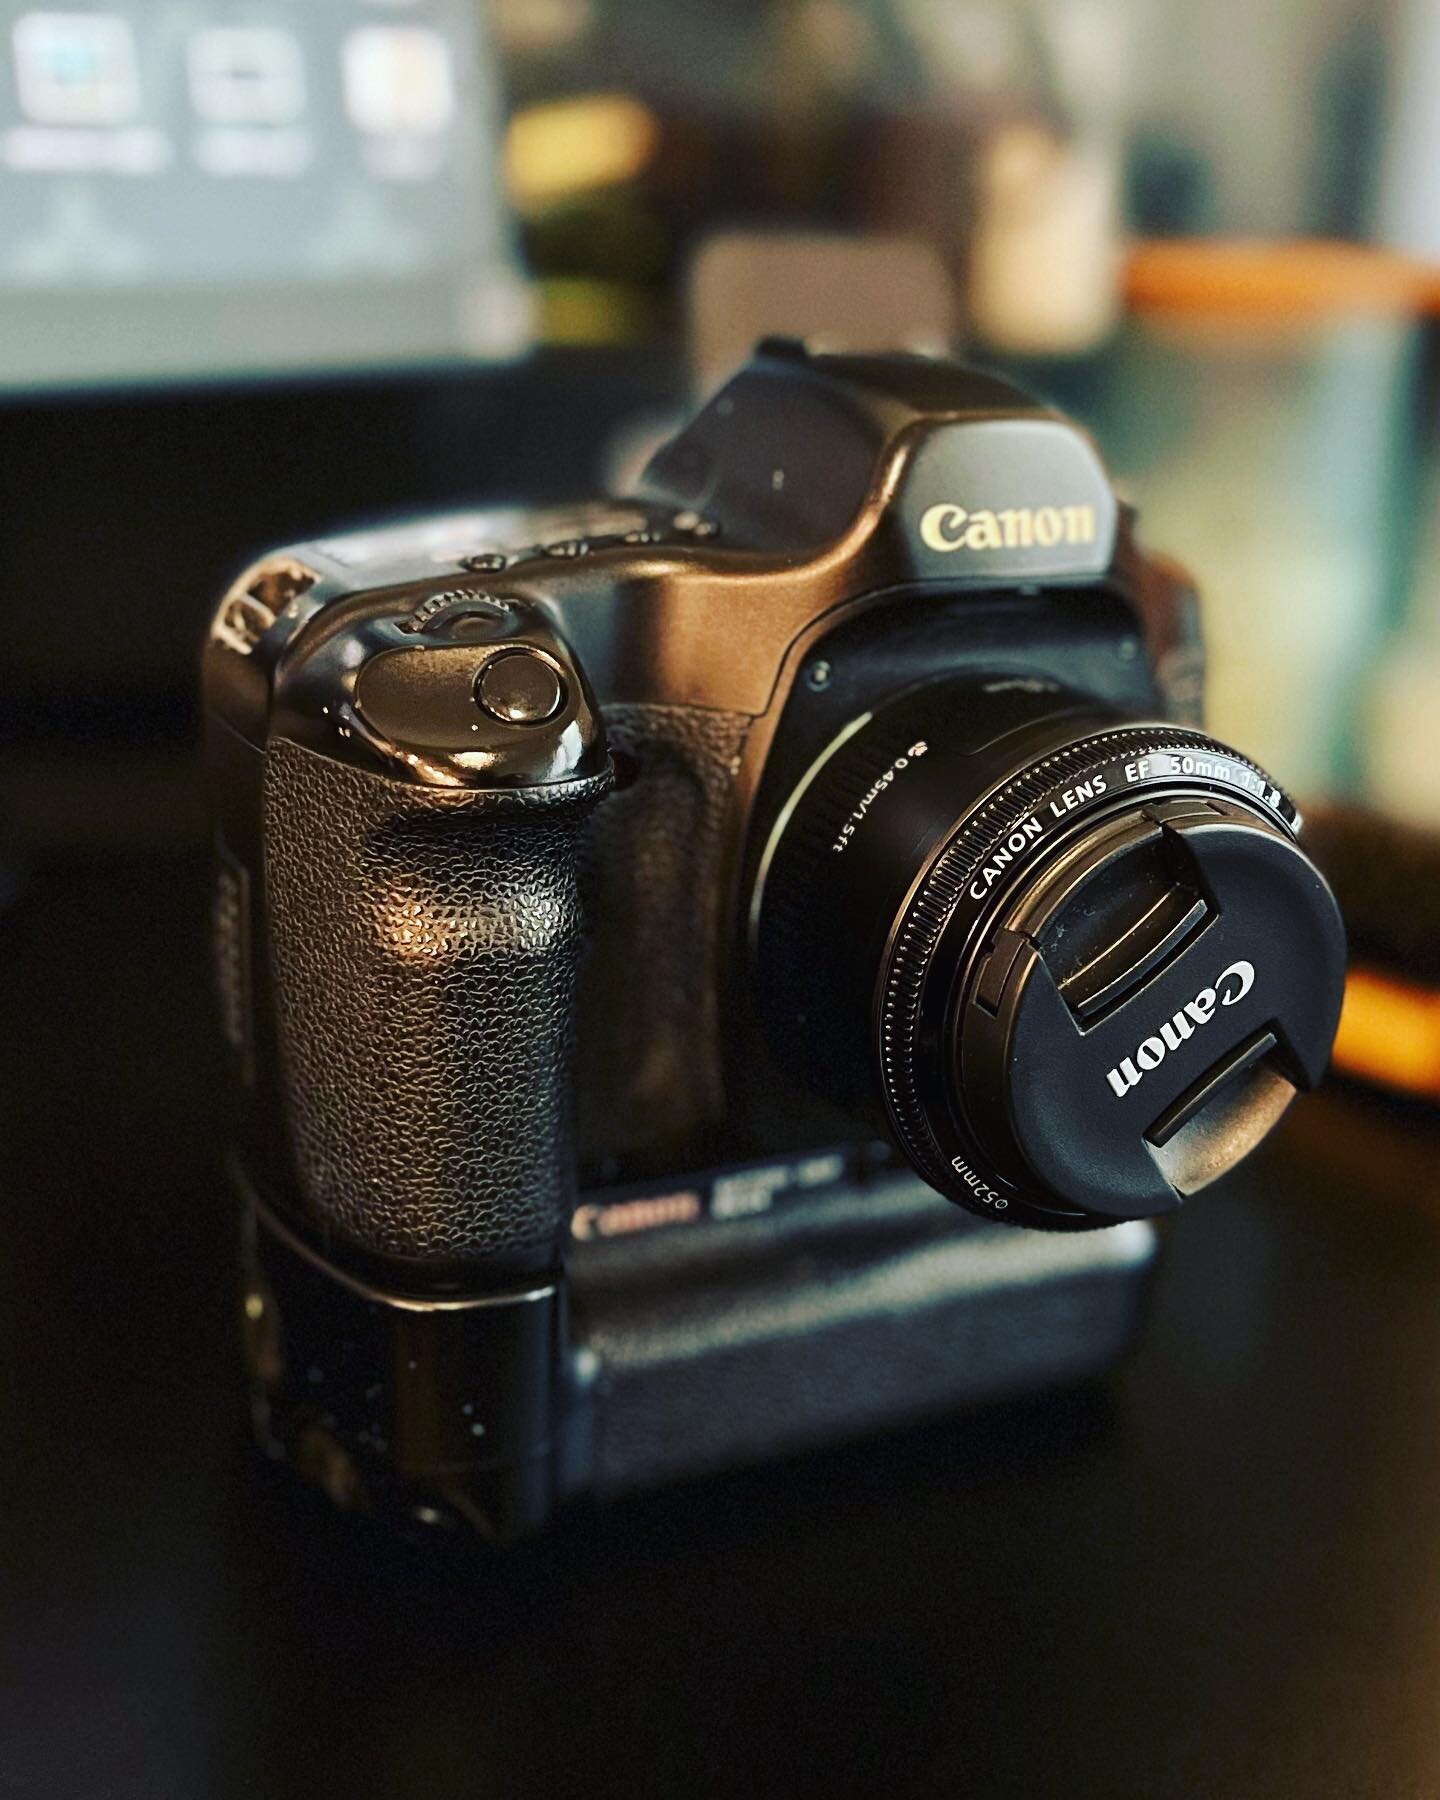 Went camping 🏕️ last weekend and kept thinking I wish I had my camera with me. This thing has been packed for years but I decided to beak out my original Canon 5D (classic). Nothing works. Haha. So I need to send everything to a repair shop. This is